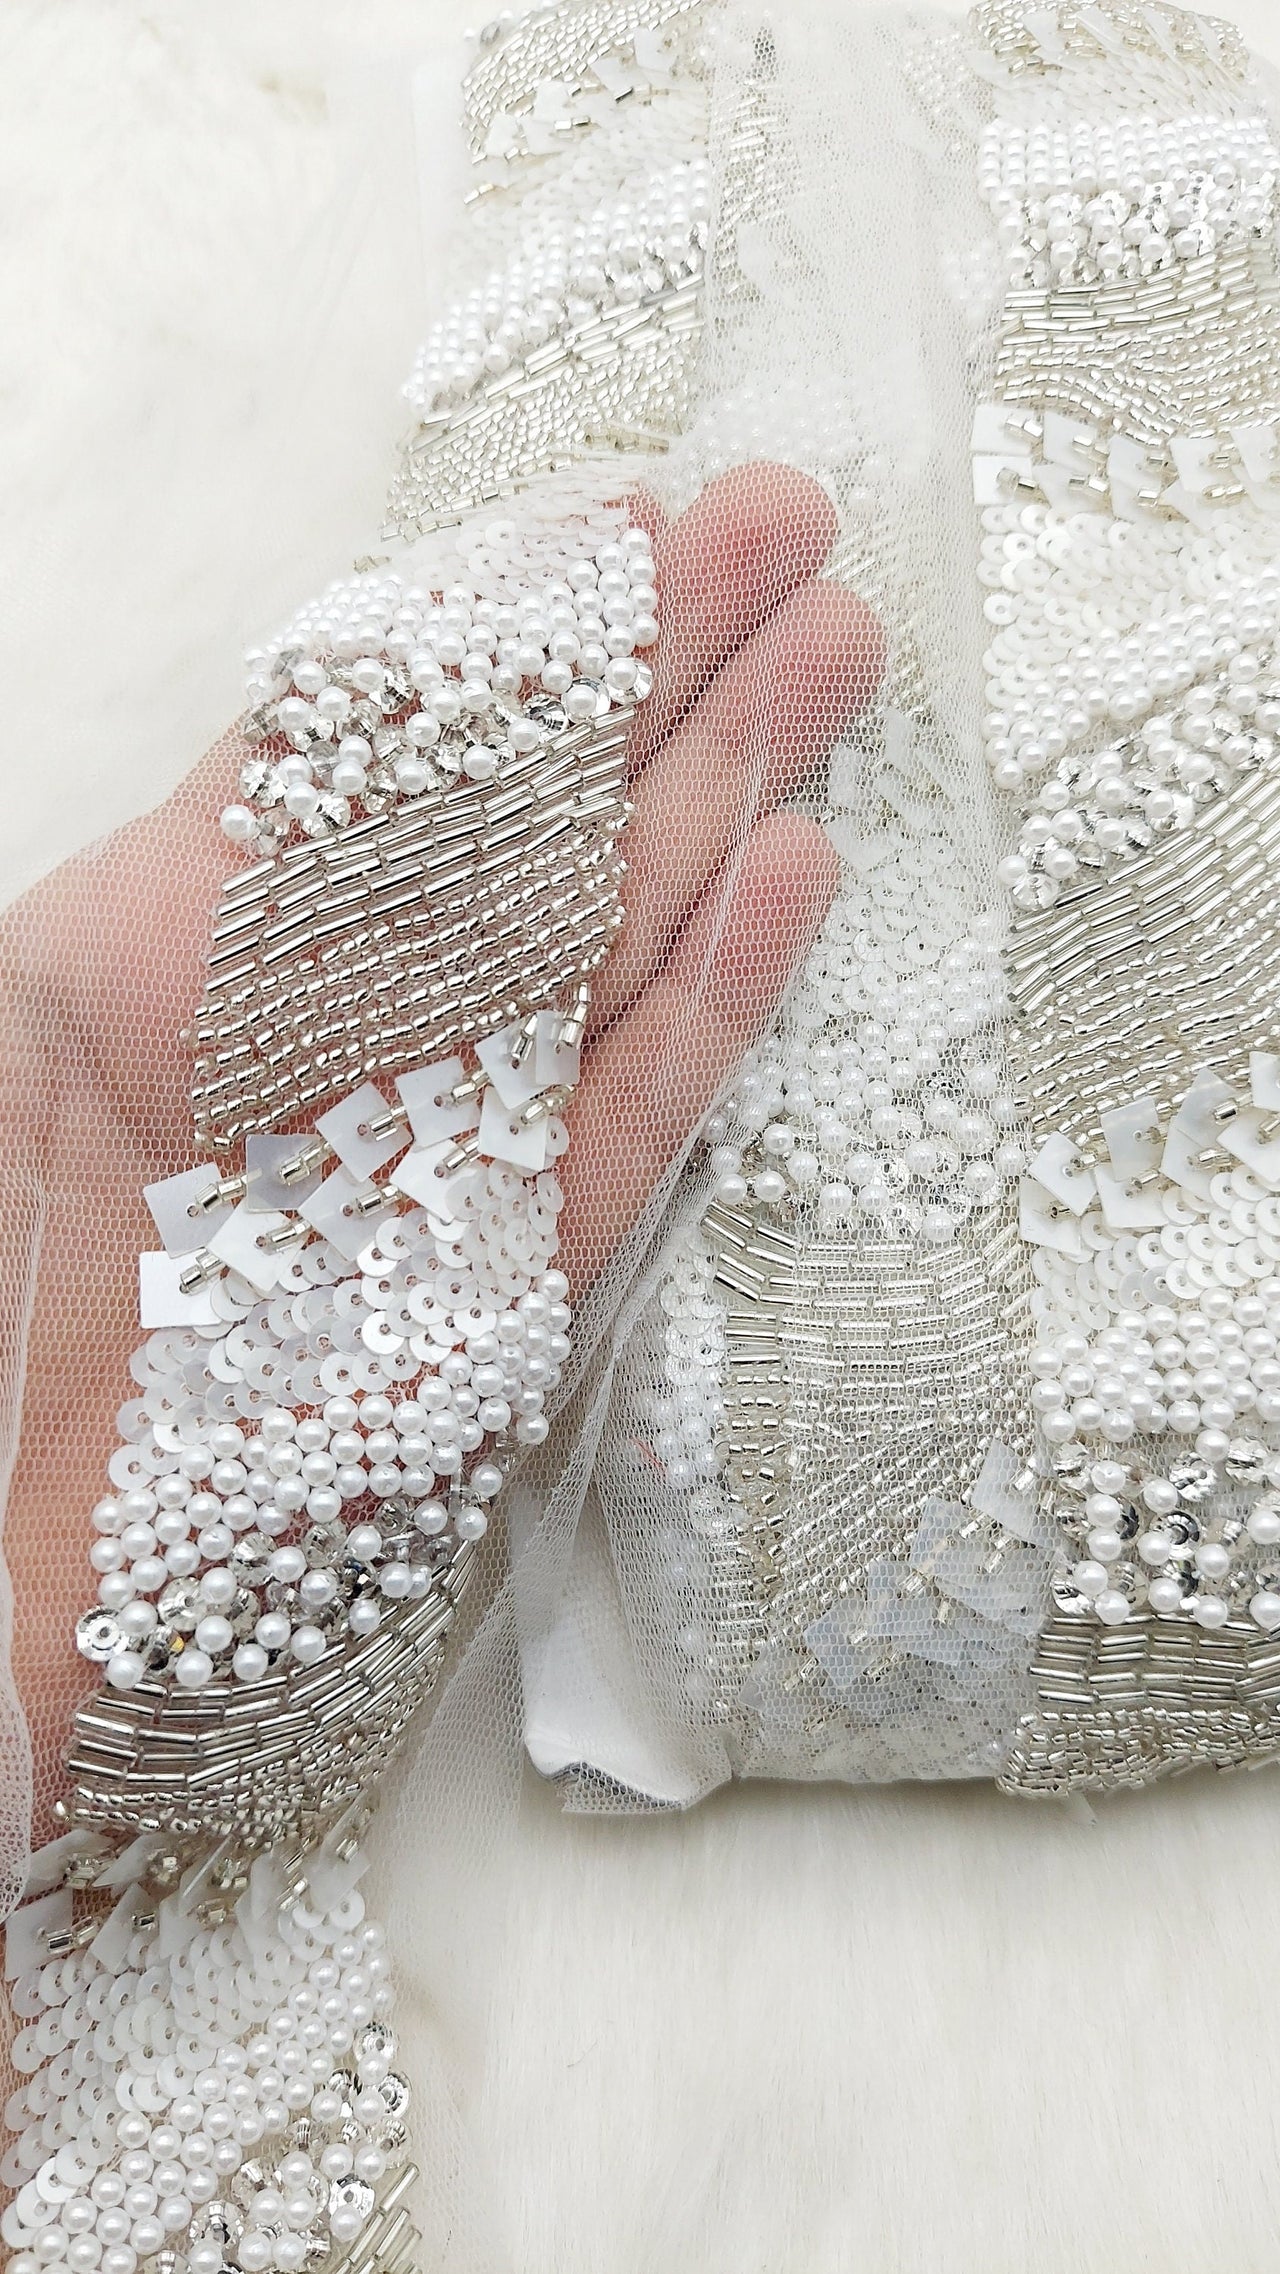 Hand Embroidered White Net Lace With White Sequins and Beads and Pearls, Exclusive Laces, Sequinned Trimming